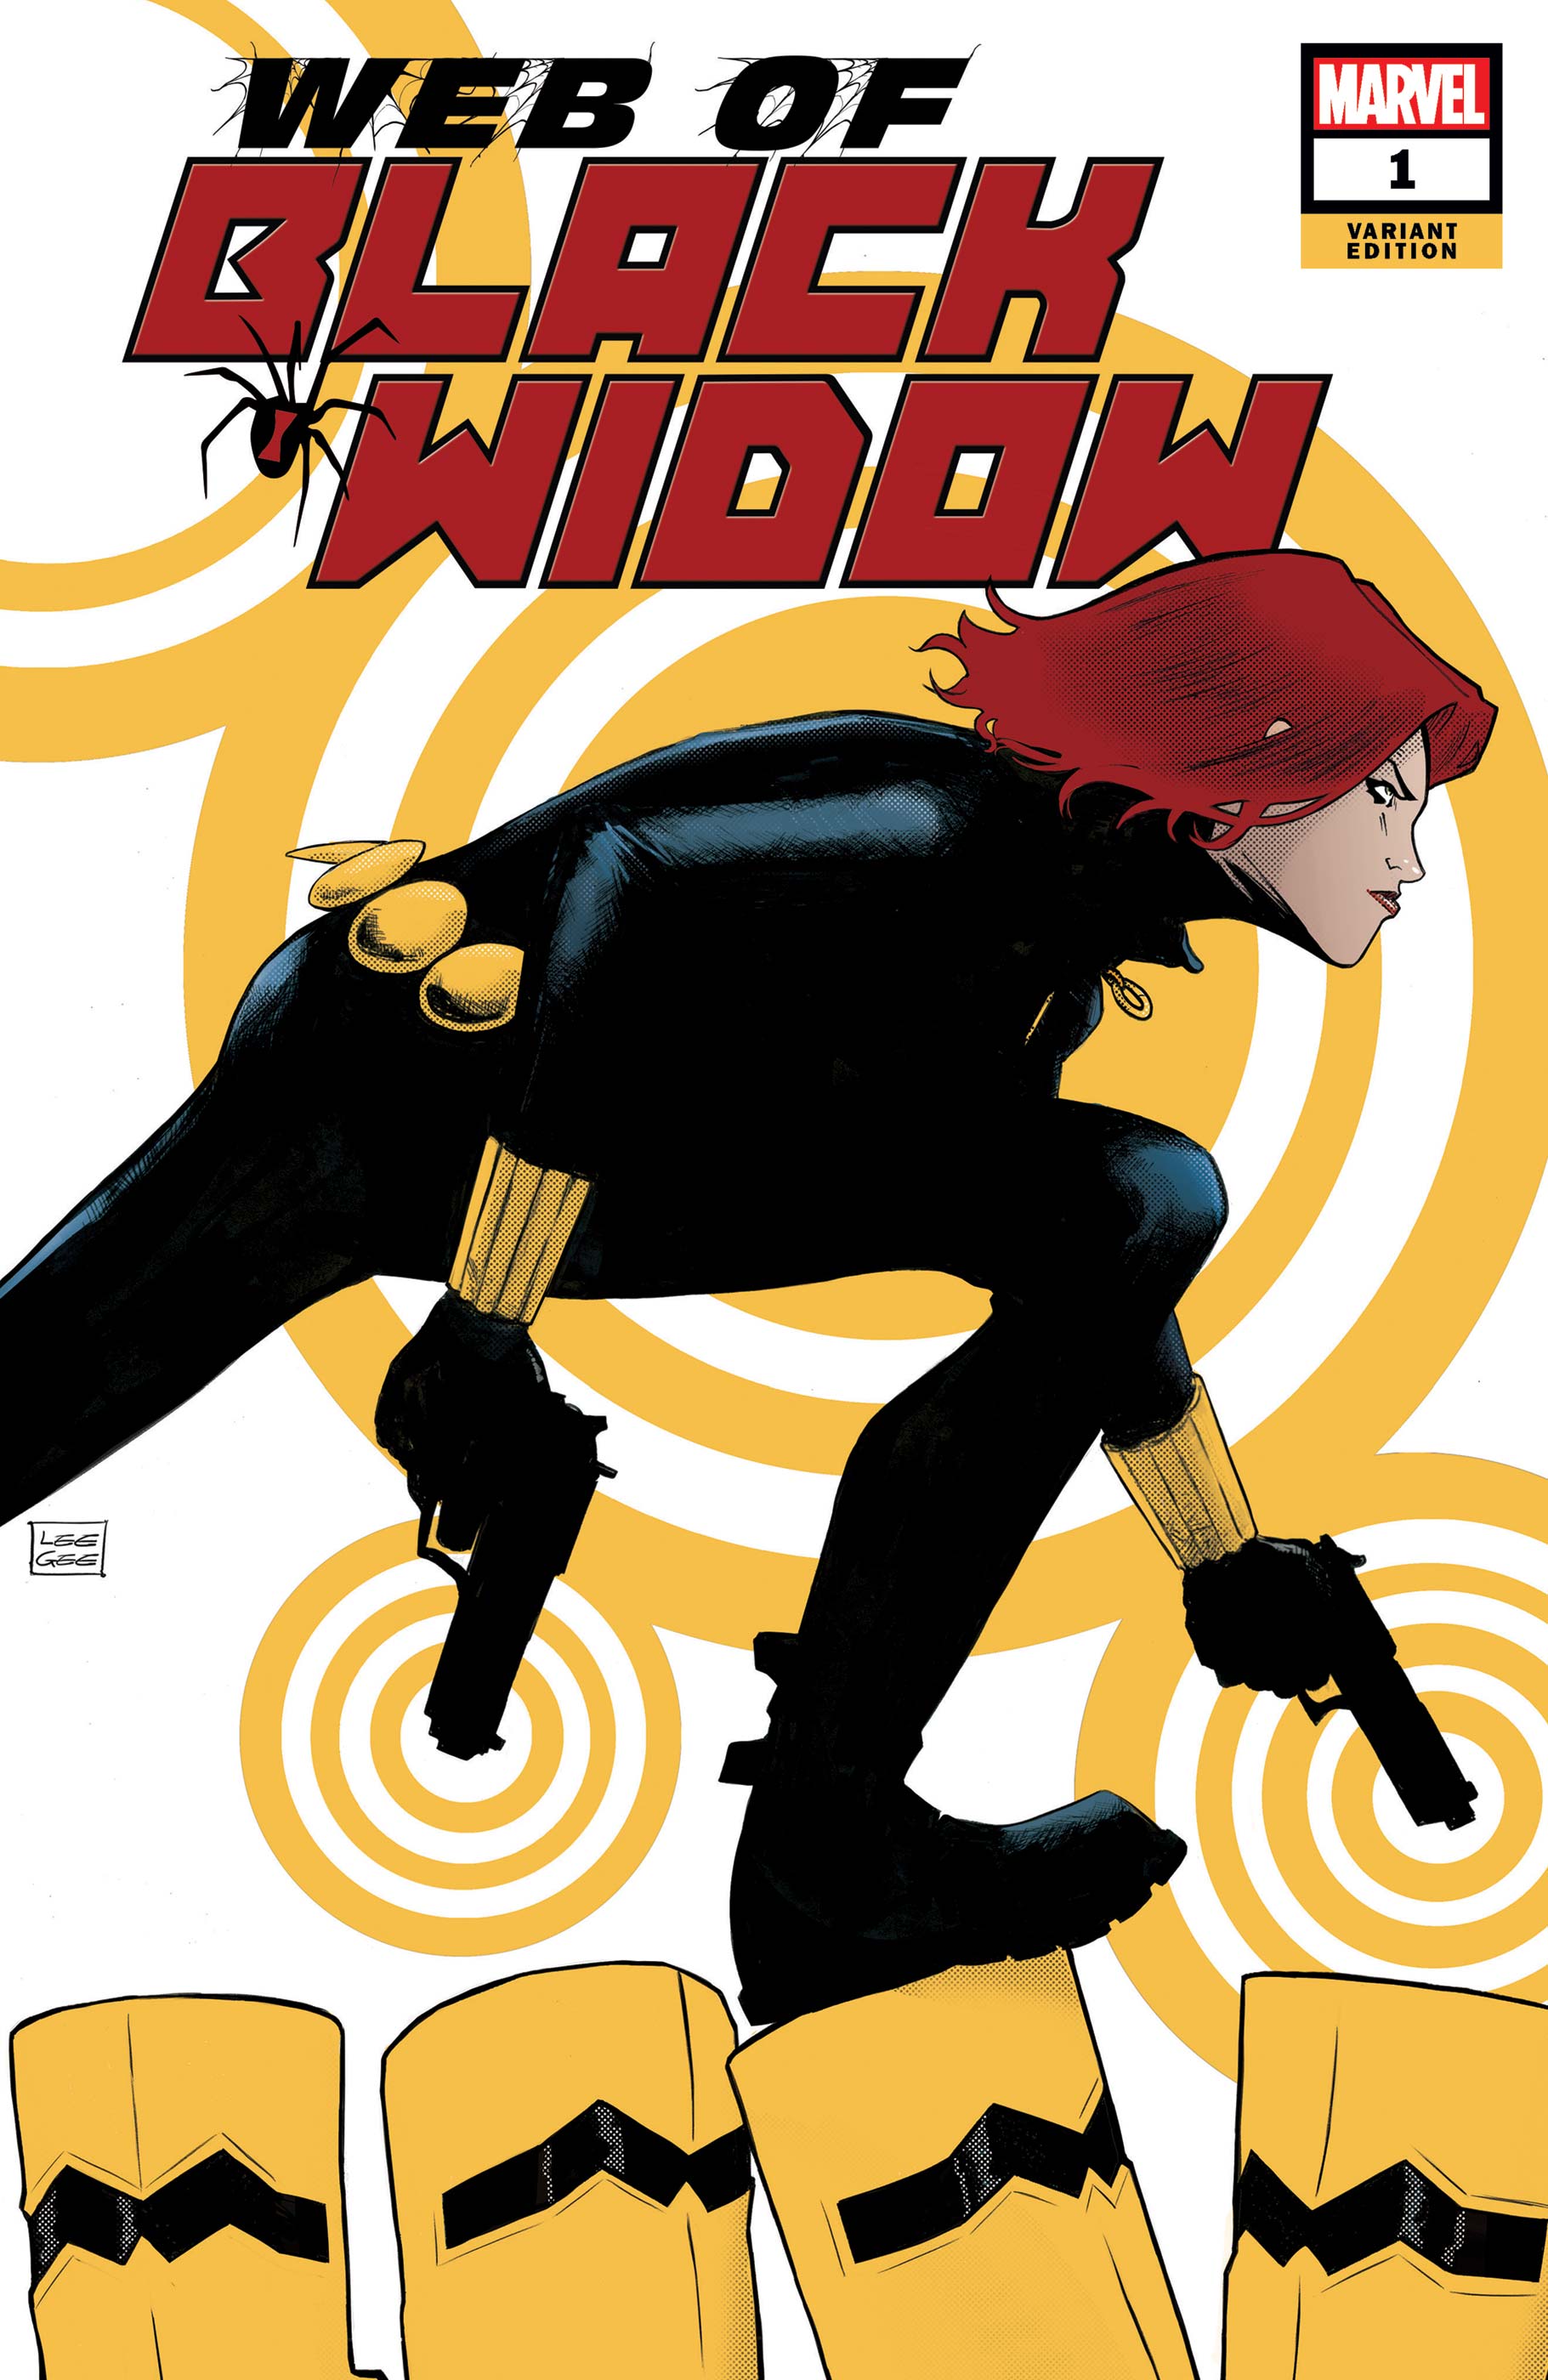 The Web of Black Widow (2019) #1 (Variant)